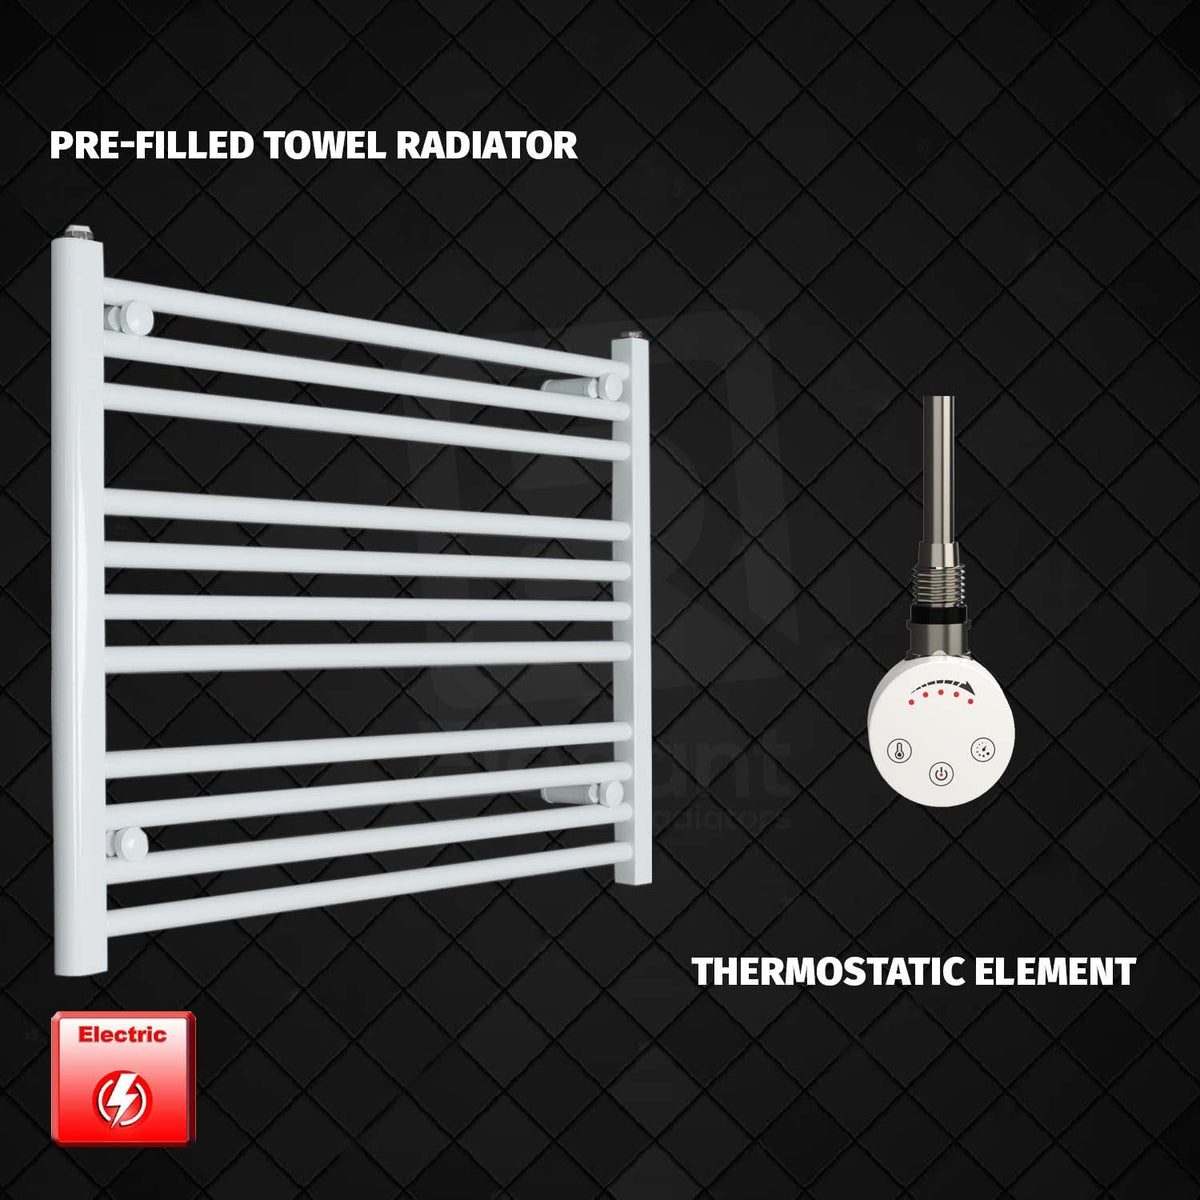 600 mm High 750 mm Wide Pre-Filled Electric Heated Towel Radiator White HTR SMR Thermostatic element no timer